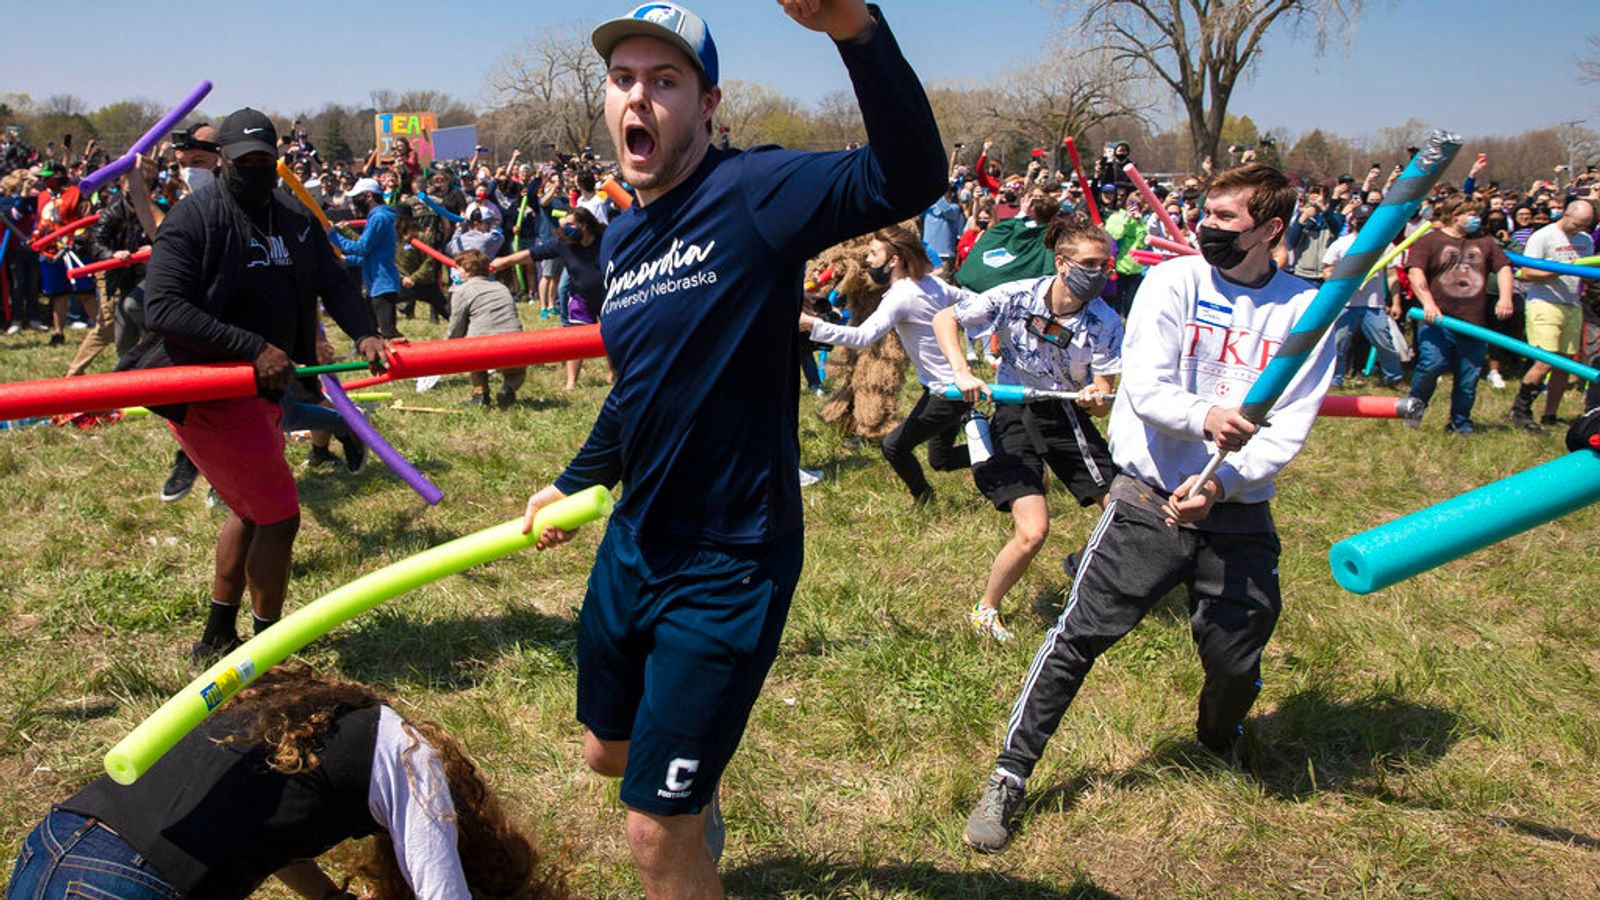 Josh fight: Crowds show up in US park for pool noodle battle to win rightful ownership of their name